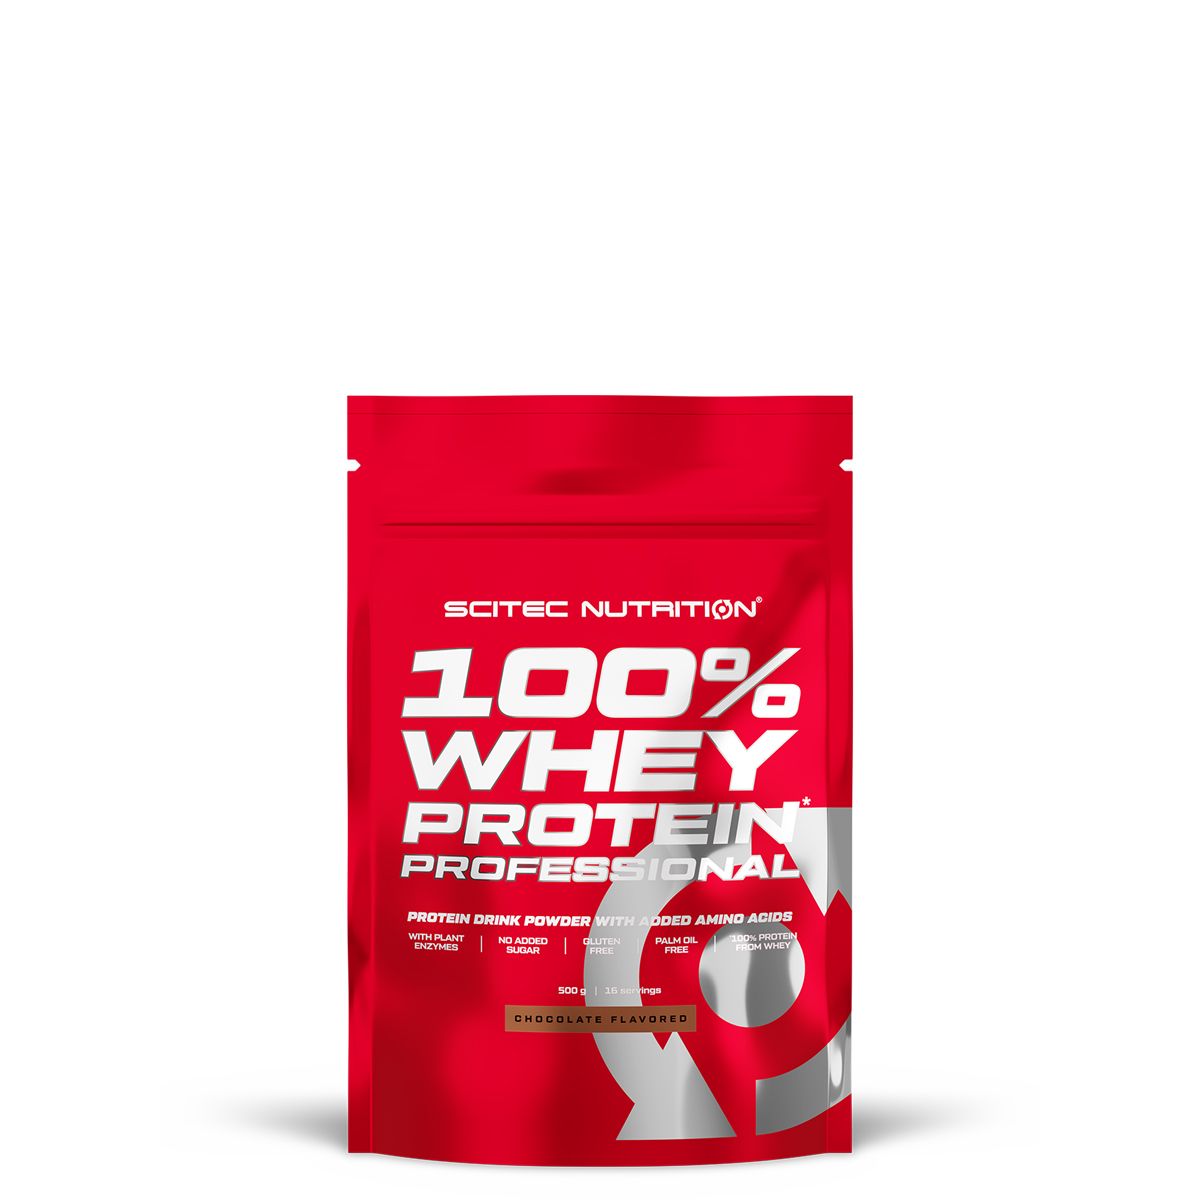 SCITEC NUTRITION - 100% WHEY PROTEIN PROFESSIONAL - 500 G (0,5 KG)